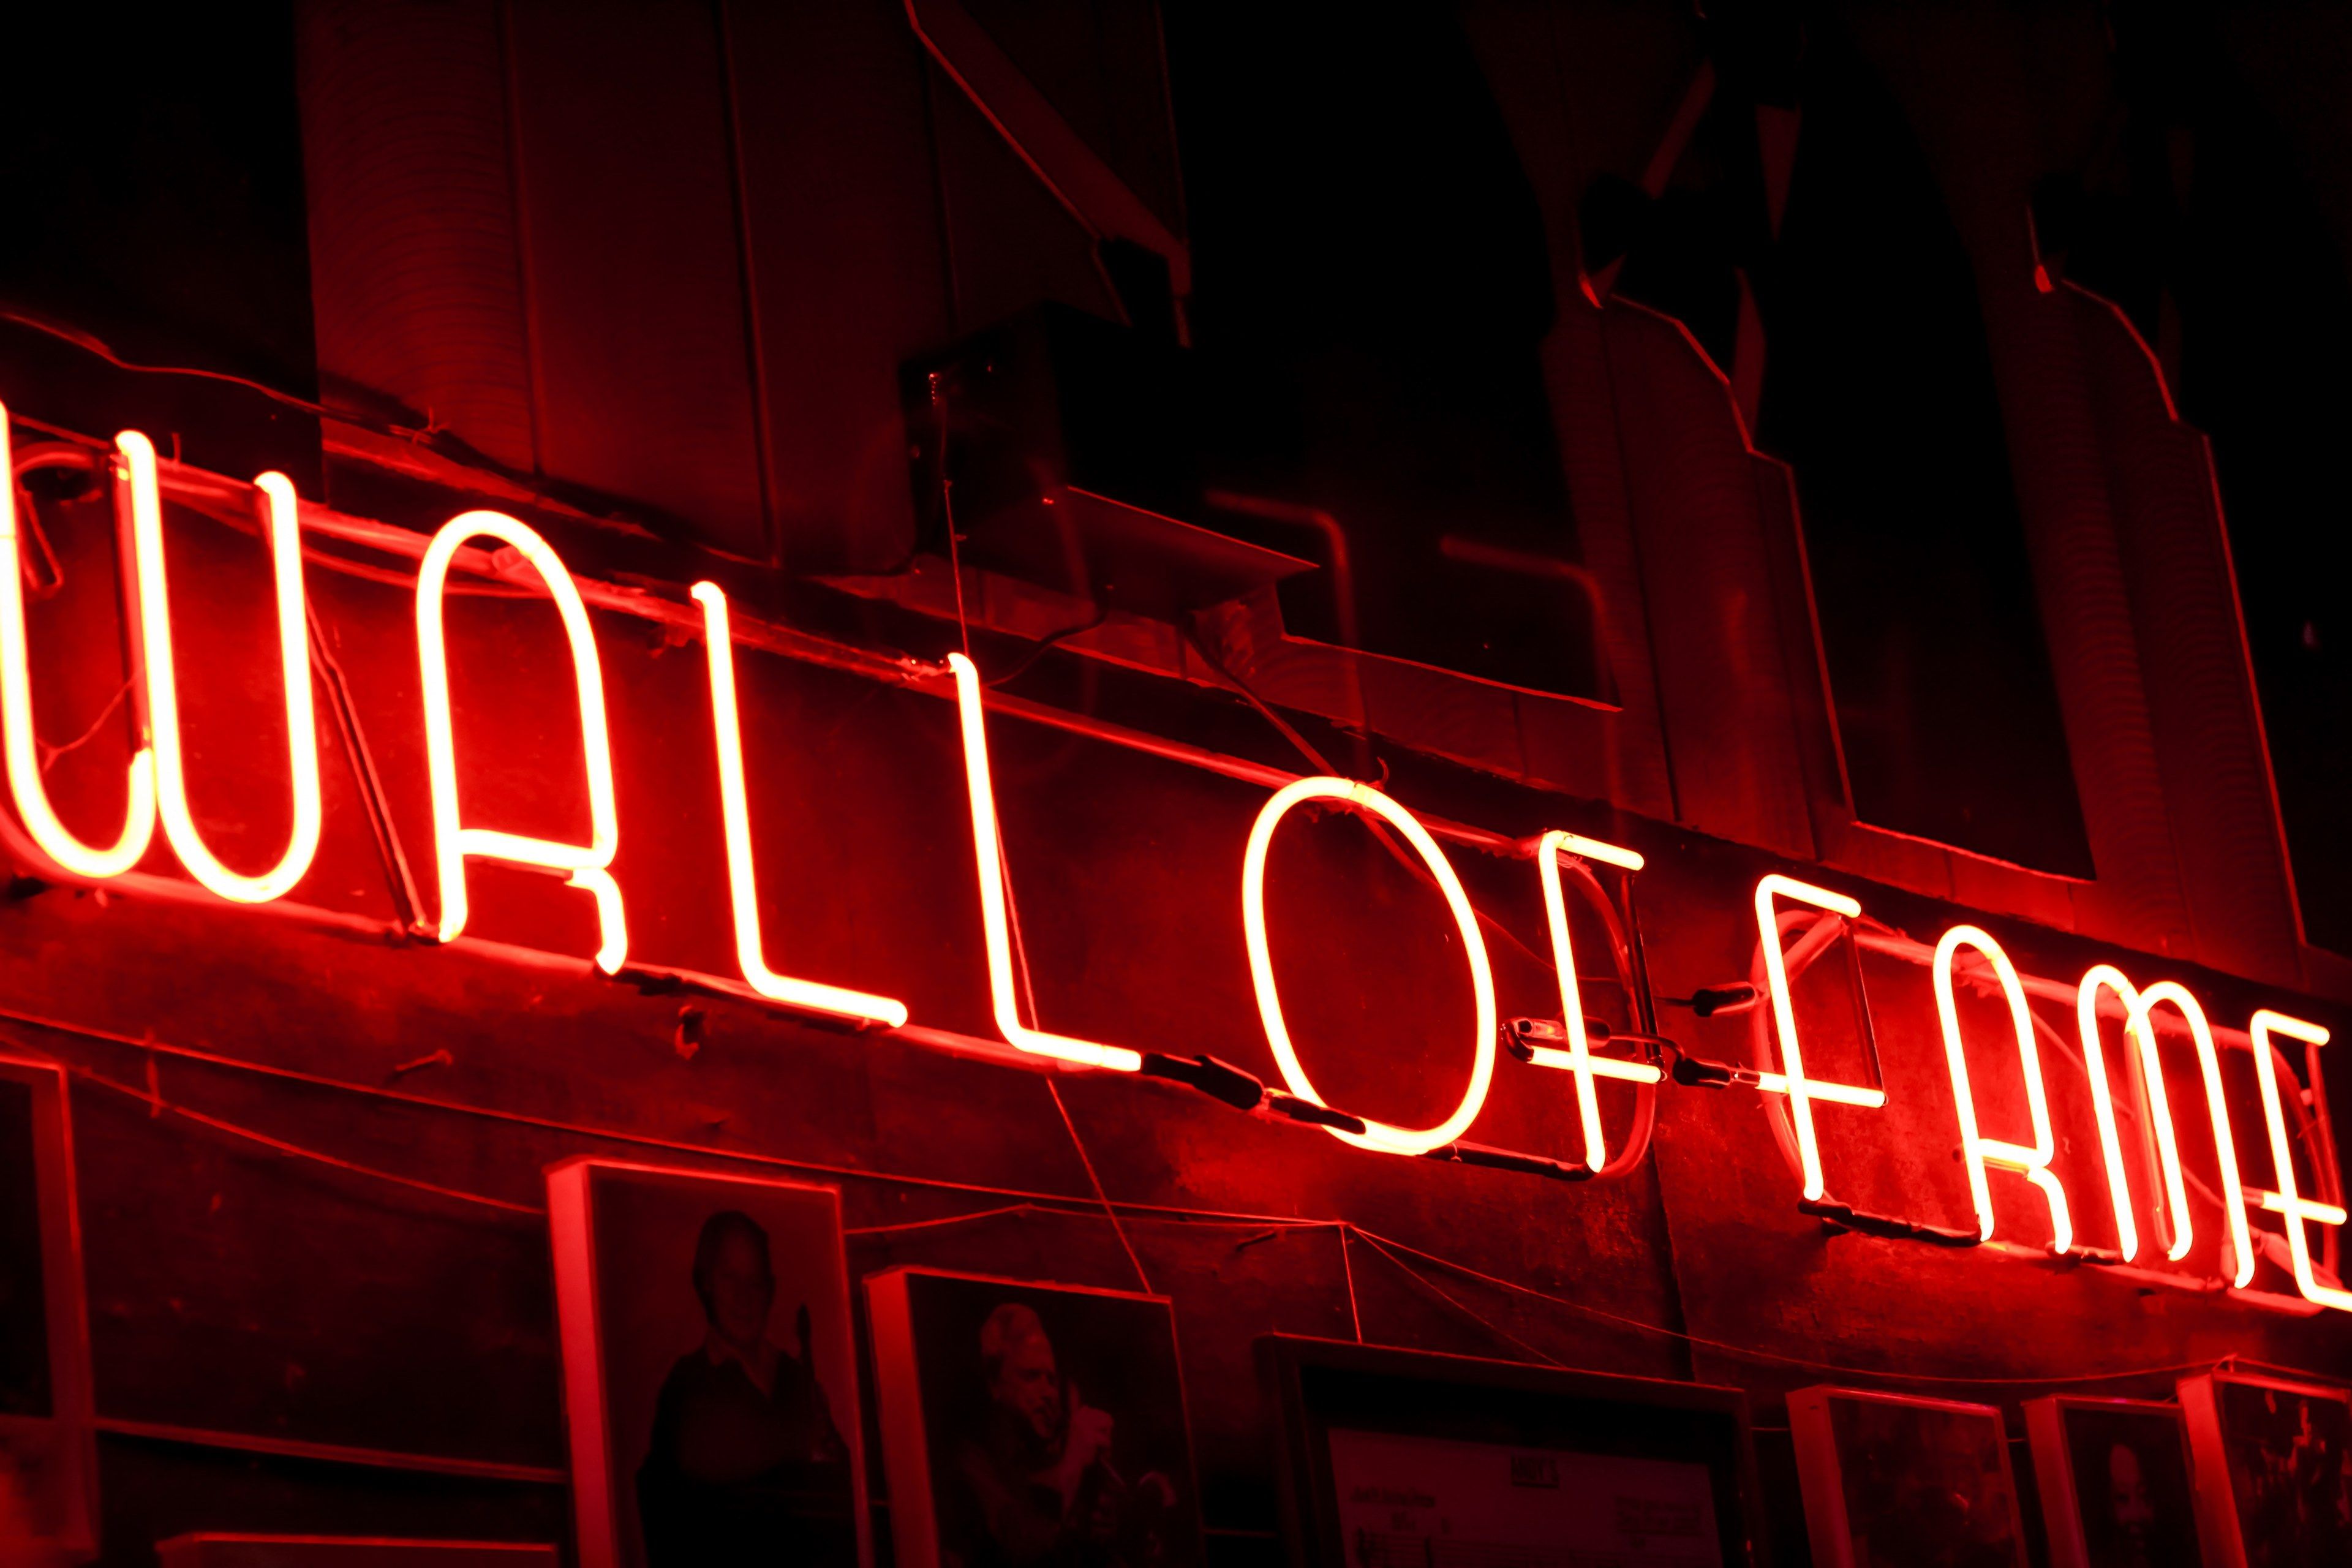 wall of fame neon sign and red sign HD 4k wallpaper and background